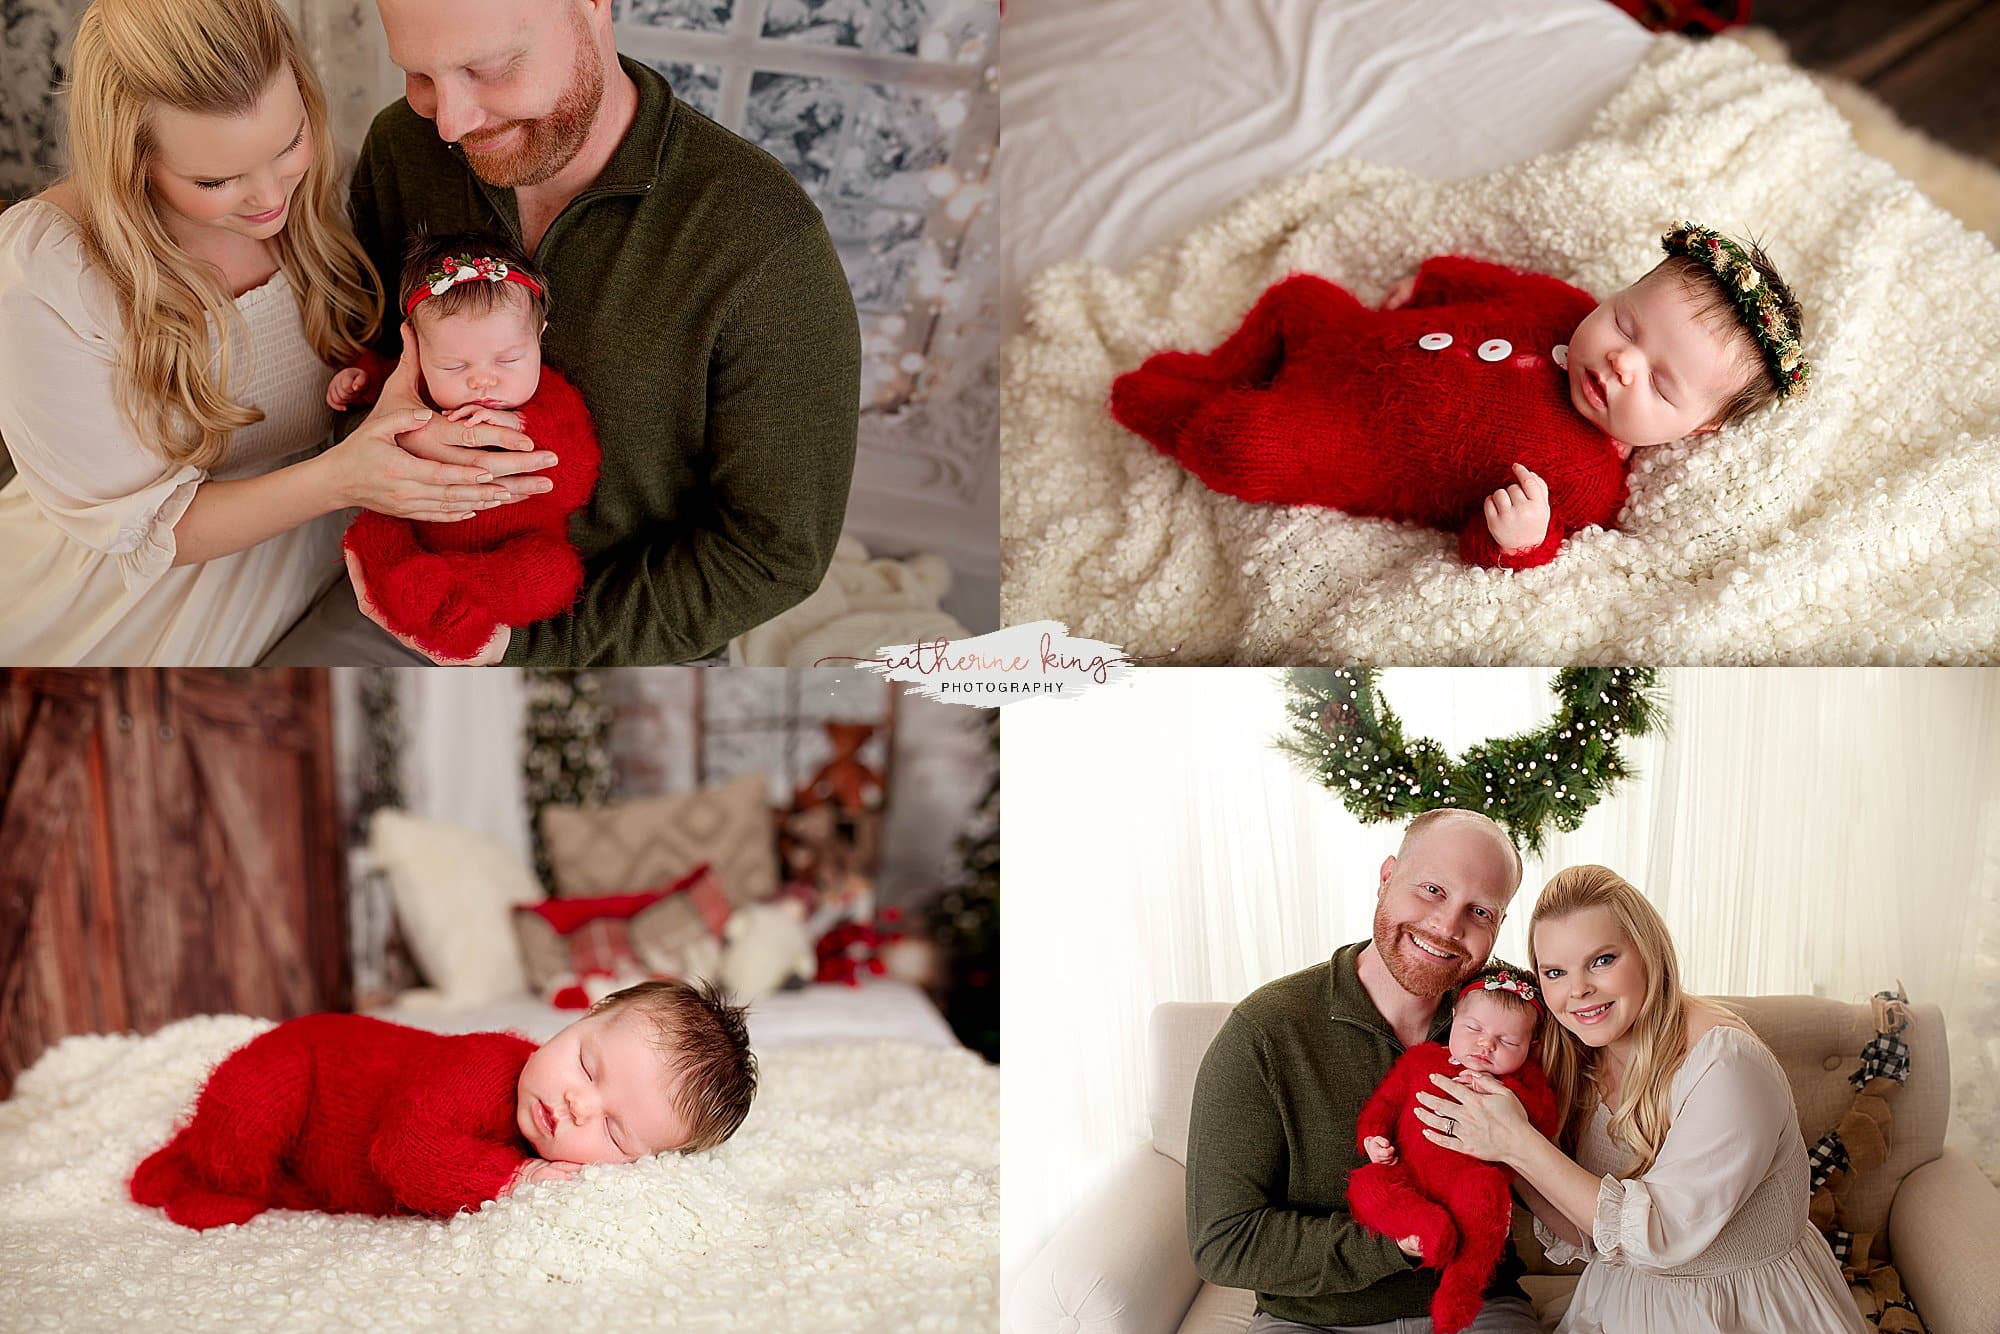 Adding a little holiday spirit to newborn sessions